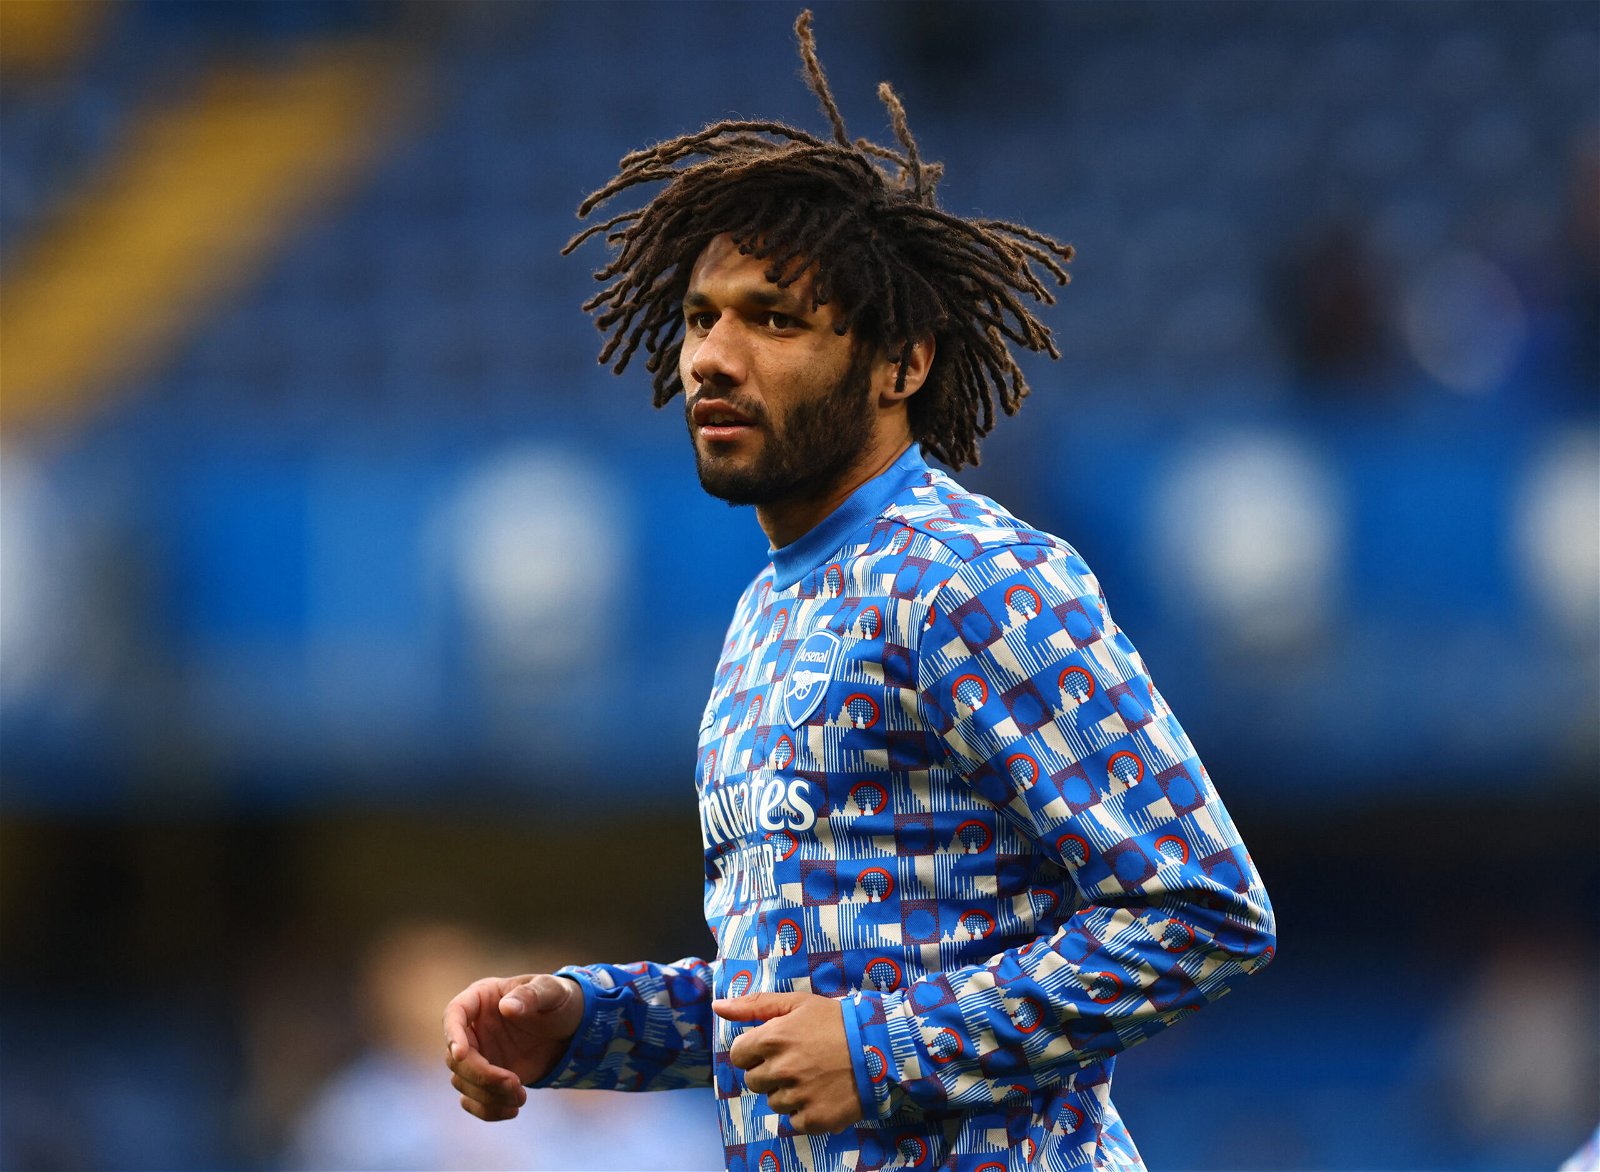 Mohamed-Elneny-trains-ahead-of-Arsenals-London-derby-clash-with-Chelsea-at-Stamford-Bridge